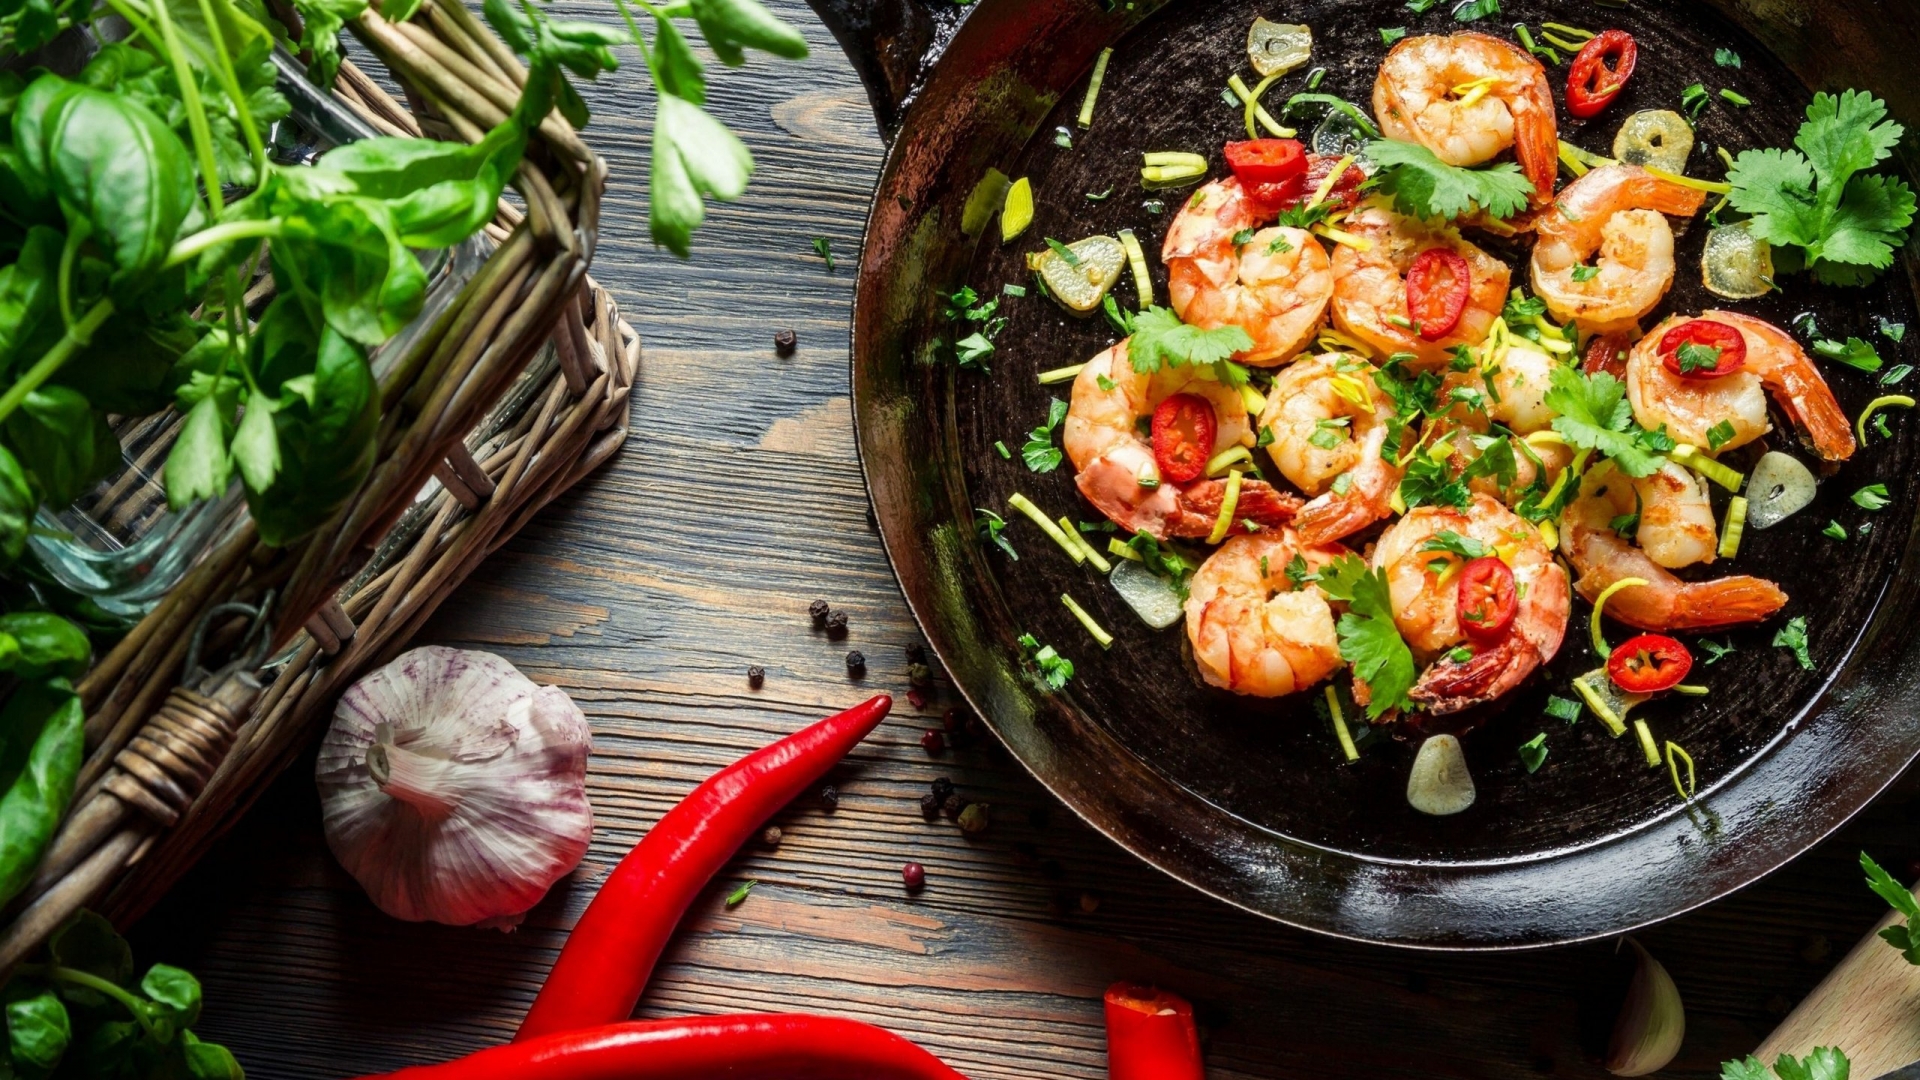 Shrimp with Pepper Chili Garlic Herbs for 1920 x 1080 HDTV 1080p resolution